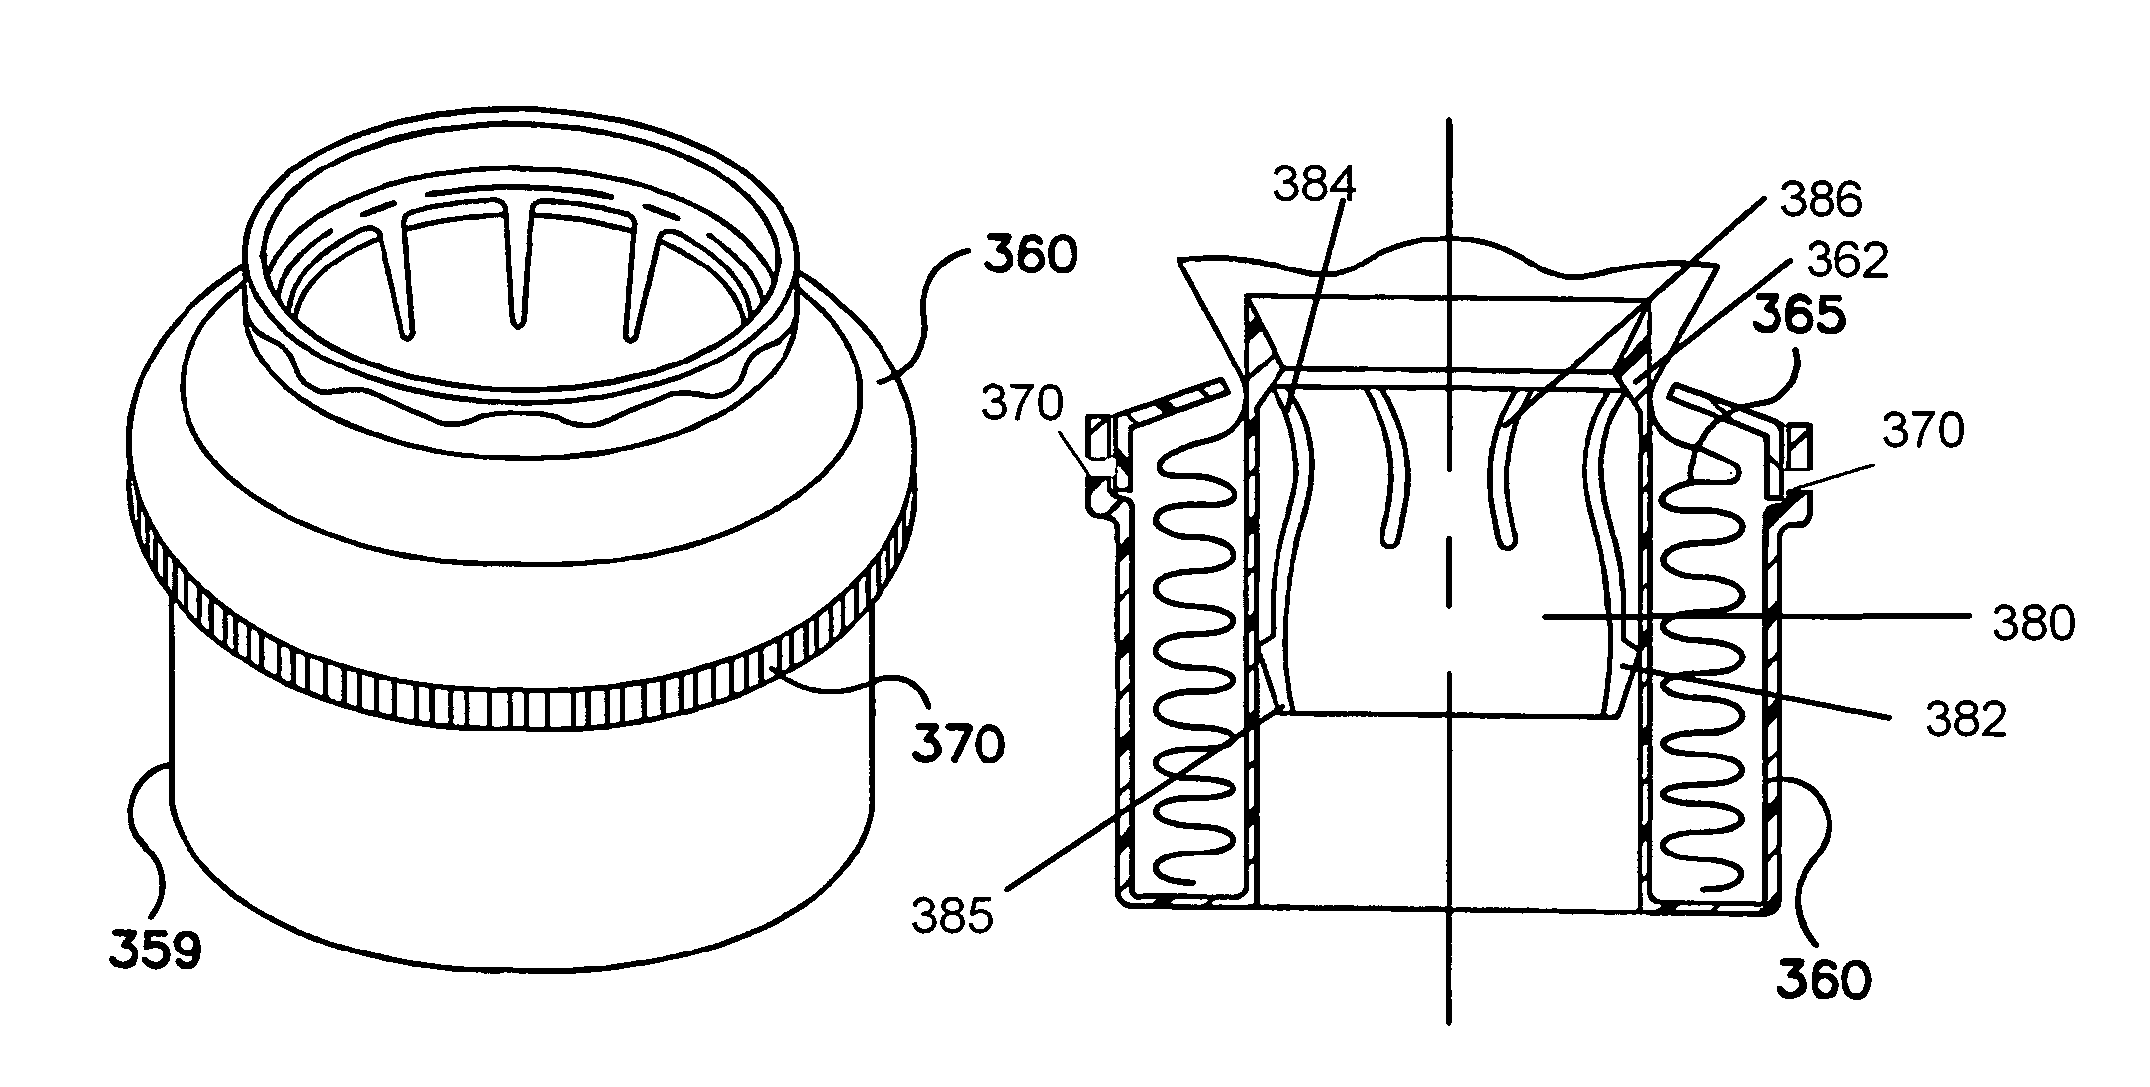 Waste disposal device including a geared rotating cartridge